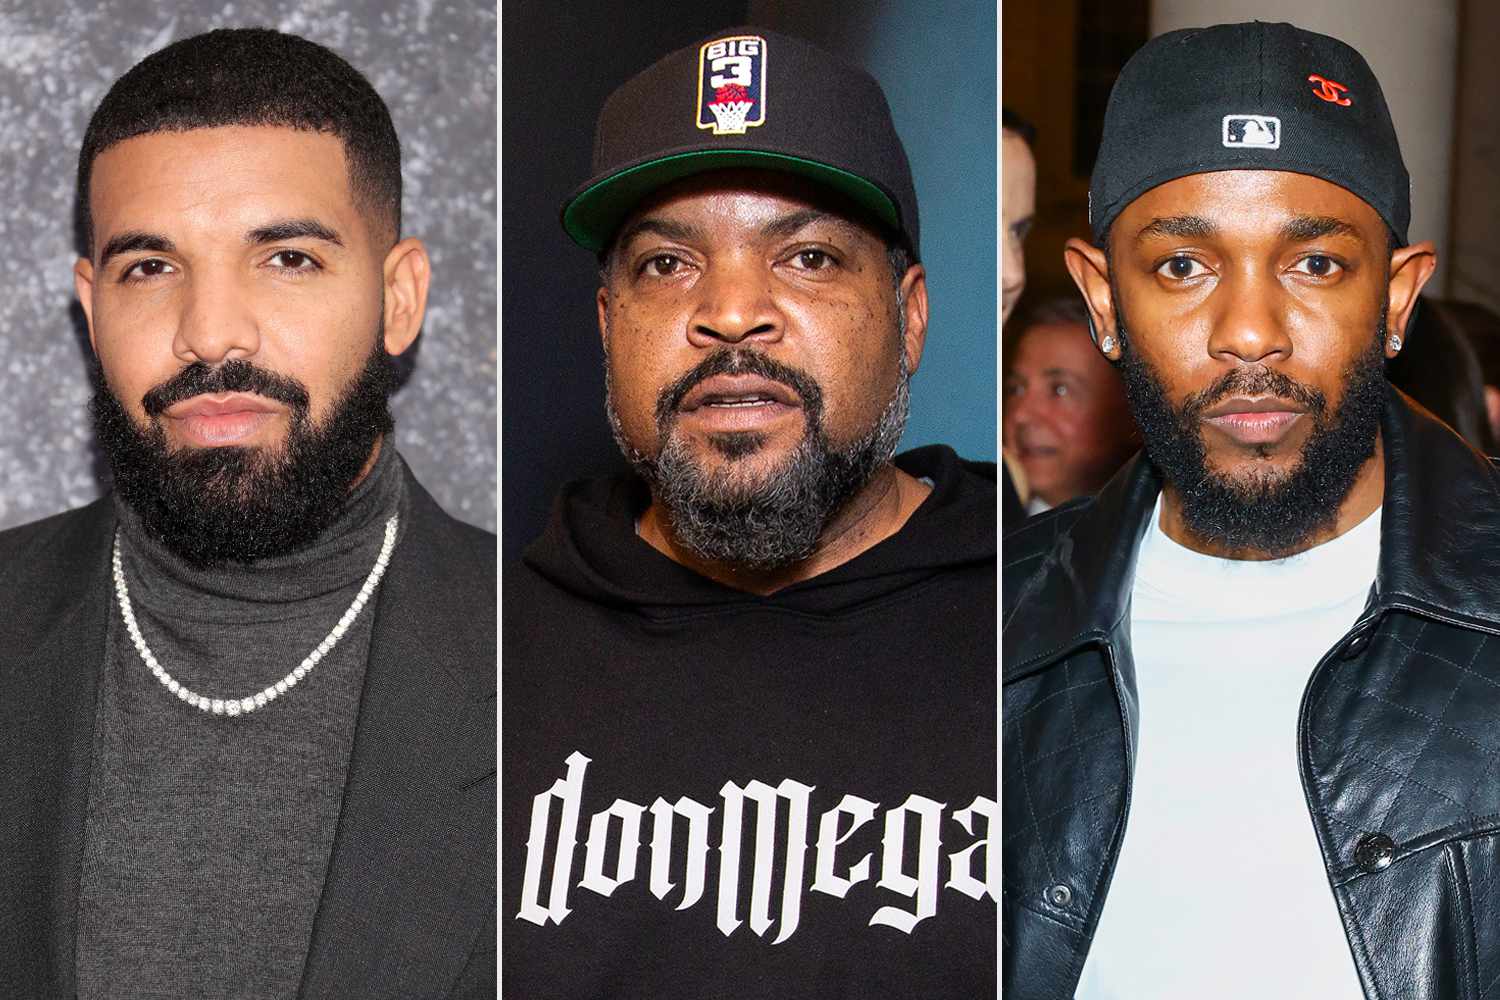 It was a good beef. Ice Cube approves of Drake and Kendrick Lamar's feud – as long as it doesn't get violent: 'The minute it get violent, it ain’t rap no more.'